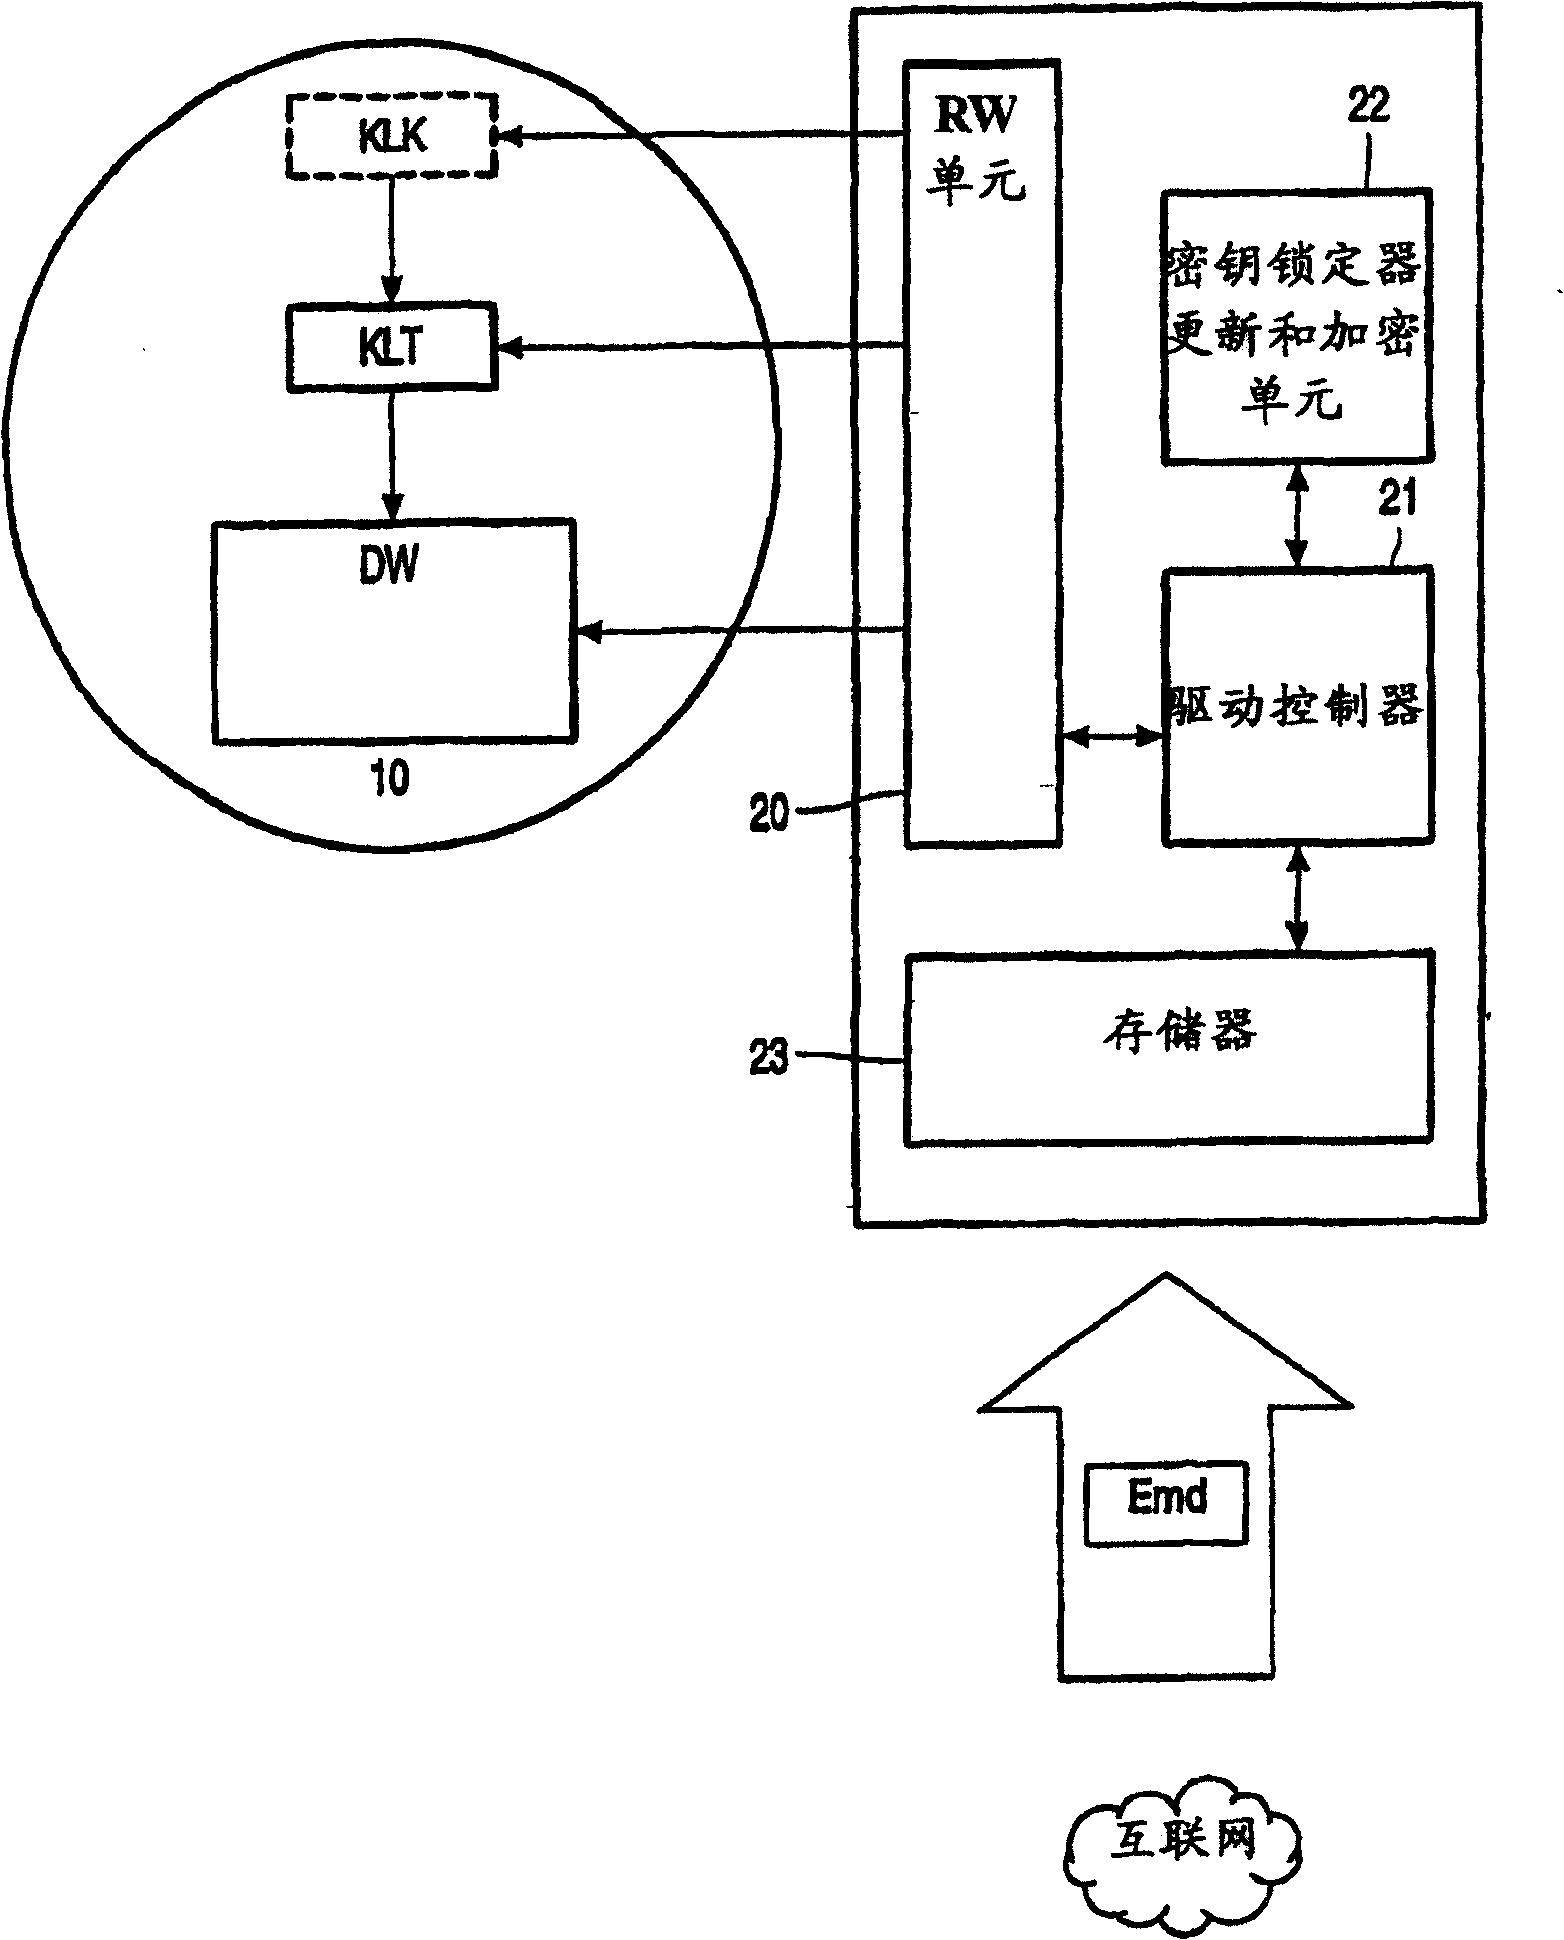 Record carrier for storing a digital work, method and device for recording digital works